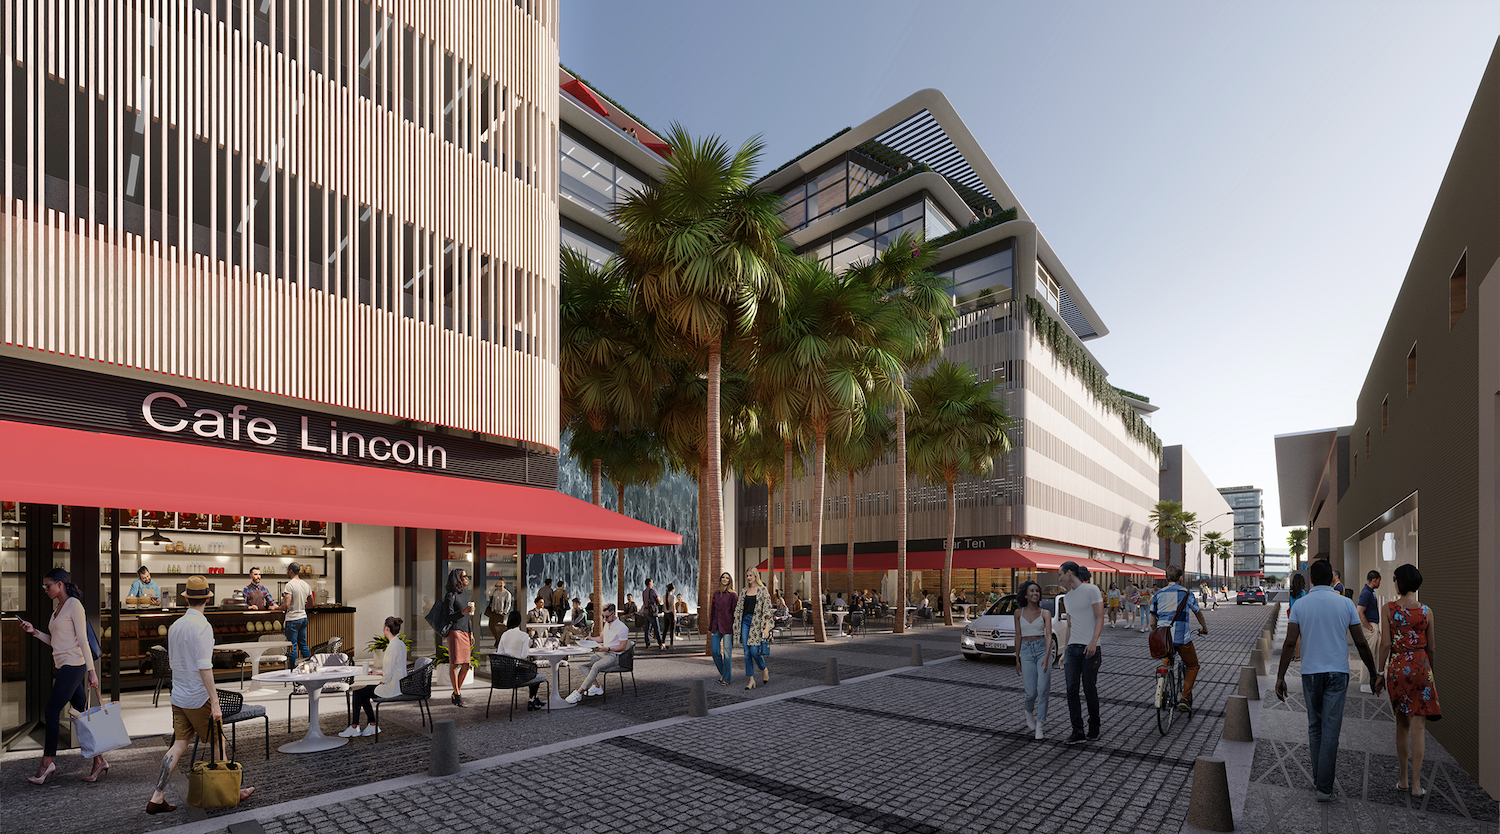 Long-Planned Miami Mega Mixed-Use Development Nears Initial Debut, 2018-08-29